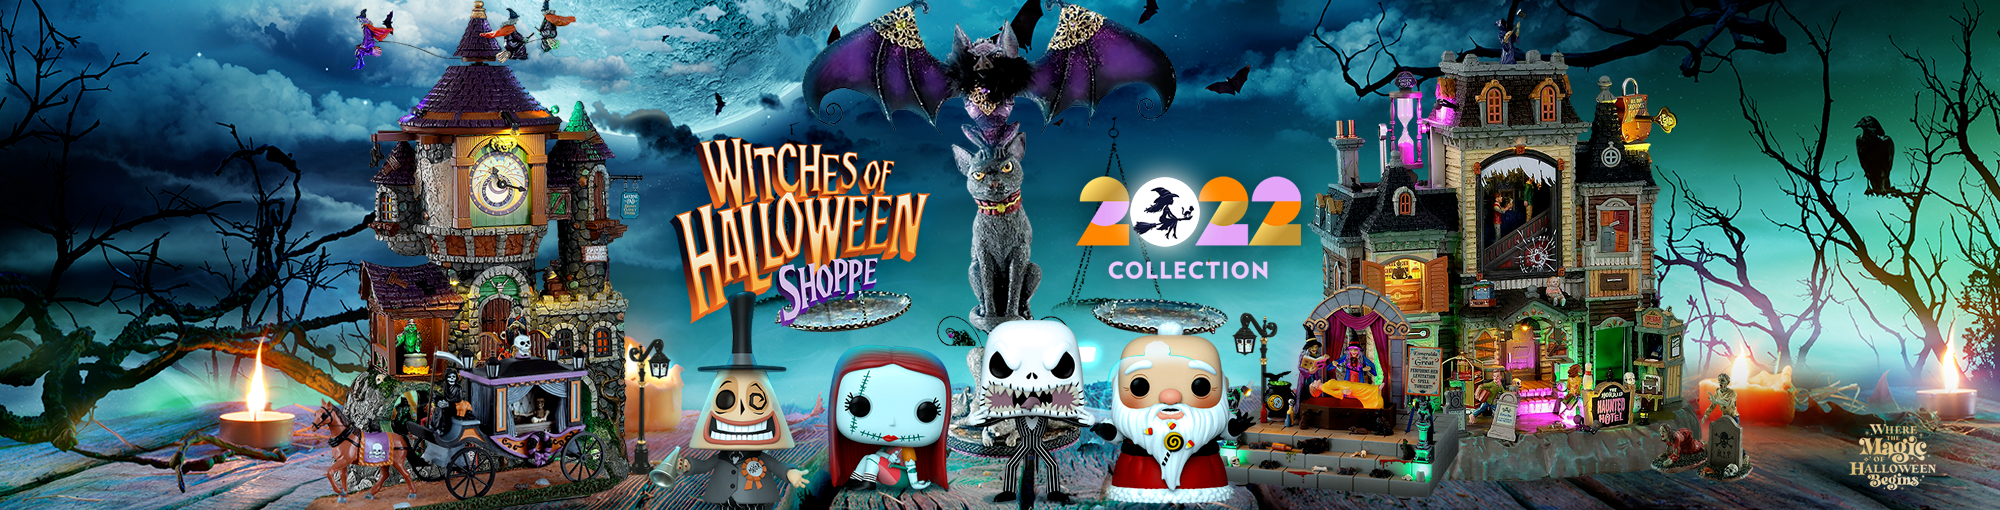 Jumps to Witches of Halloween Homepage